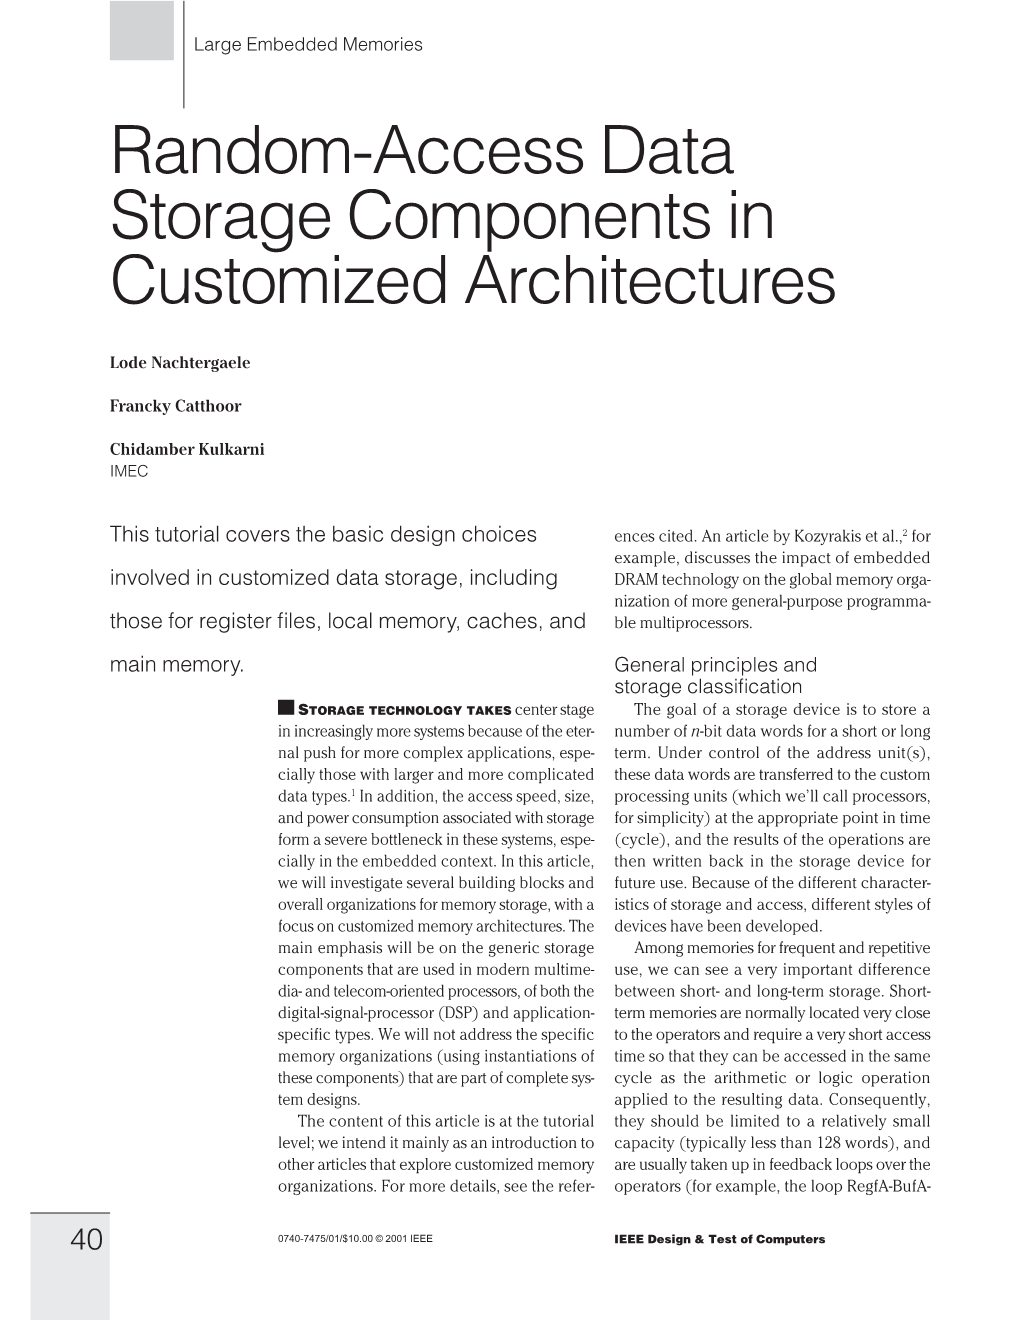 Random-Access Data Storage Components in Customized Architectures